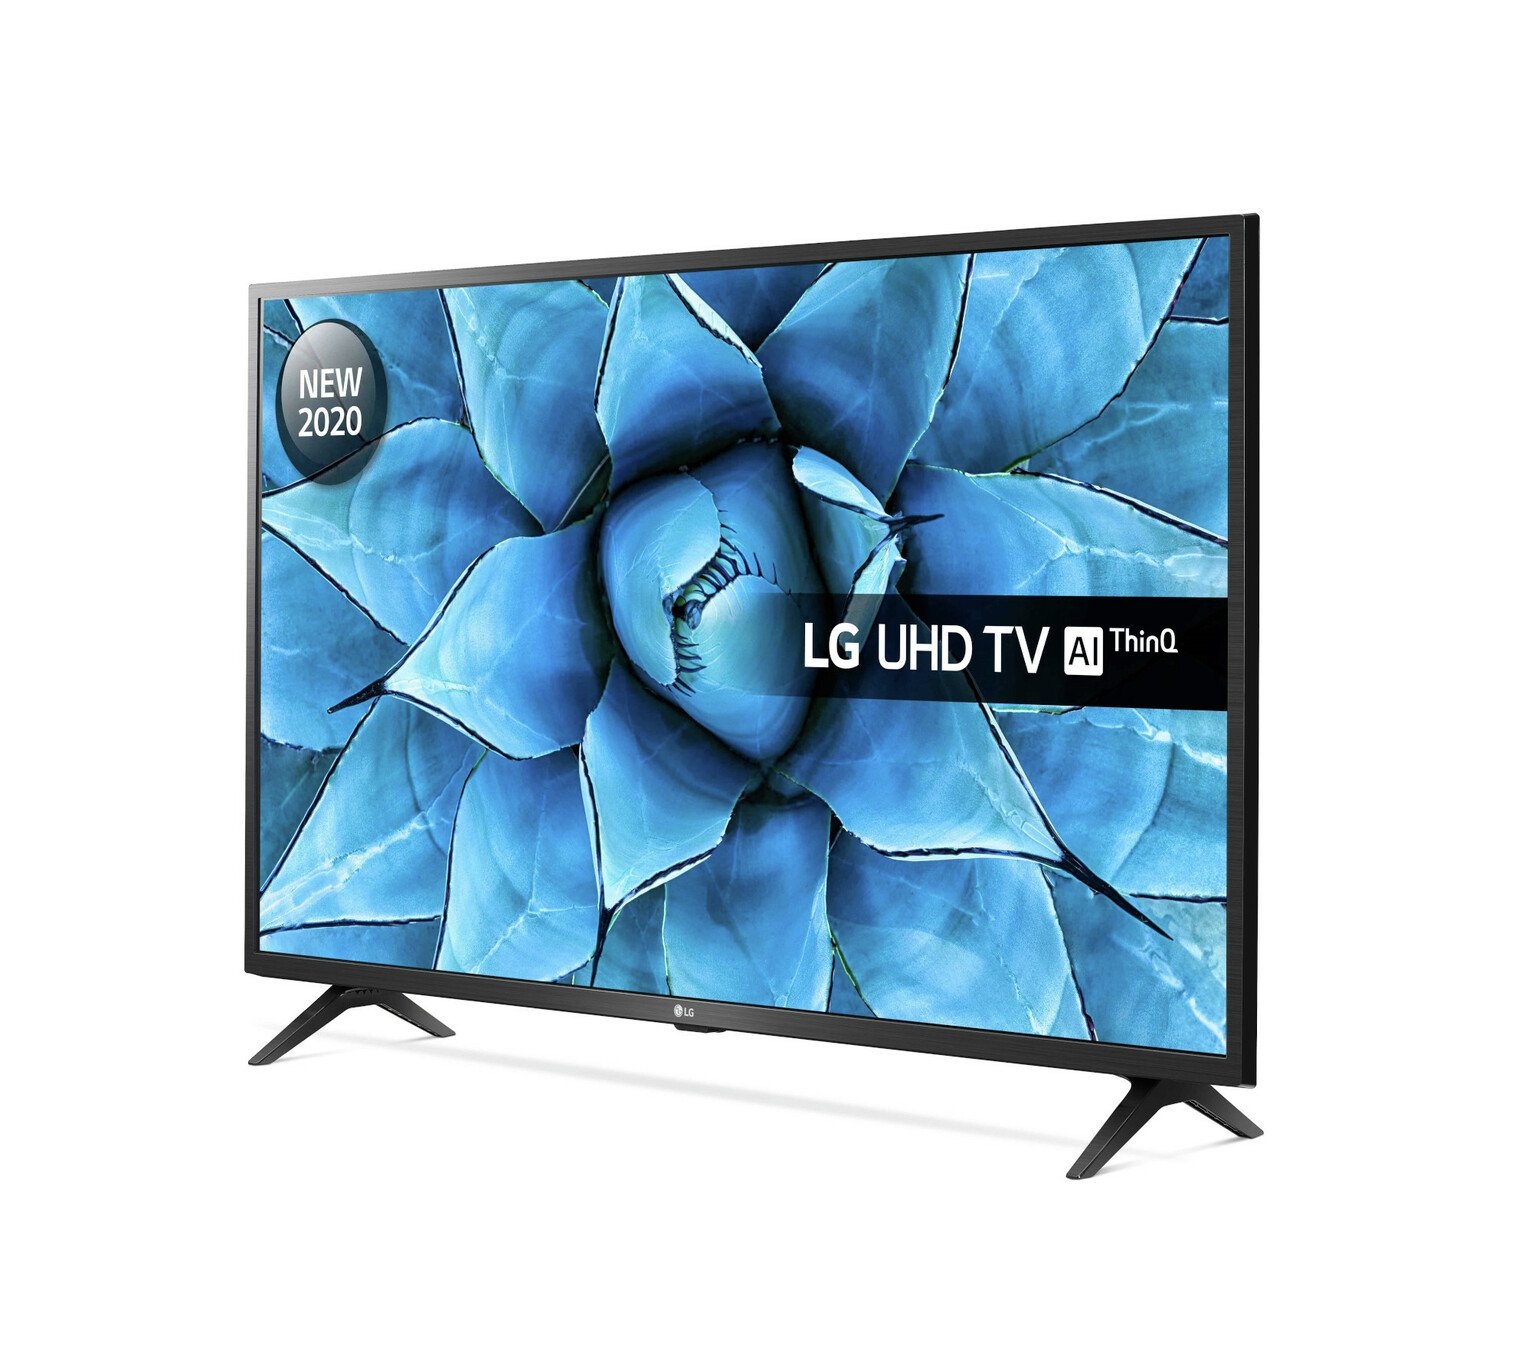 LG 50 Inch 50UN7300 Smart 4K Ultra HD LED TV with HDR Review